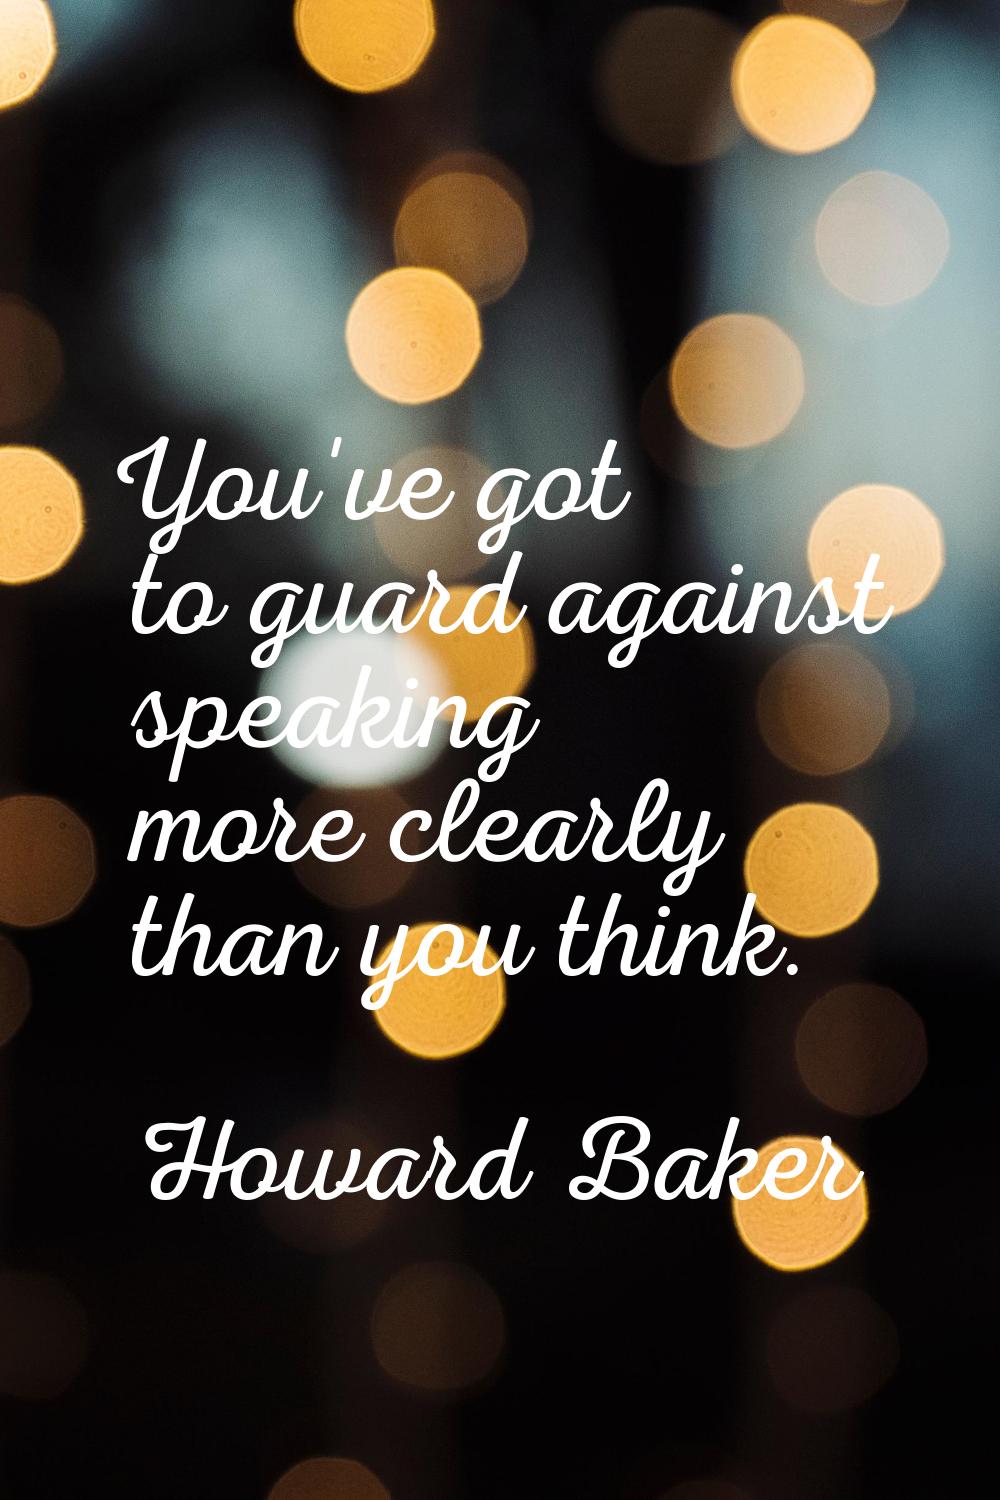 You've got to guard against speaking more clearly than you think.